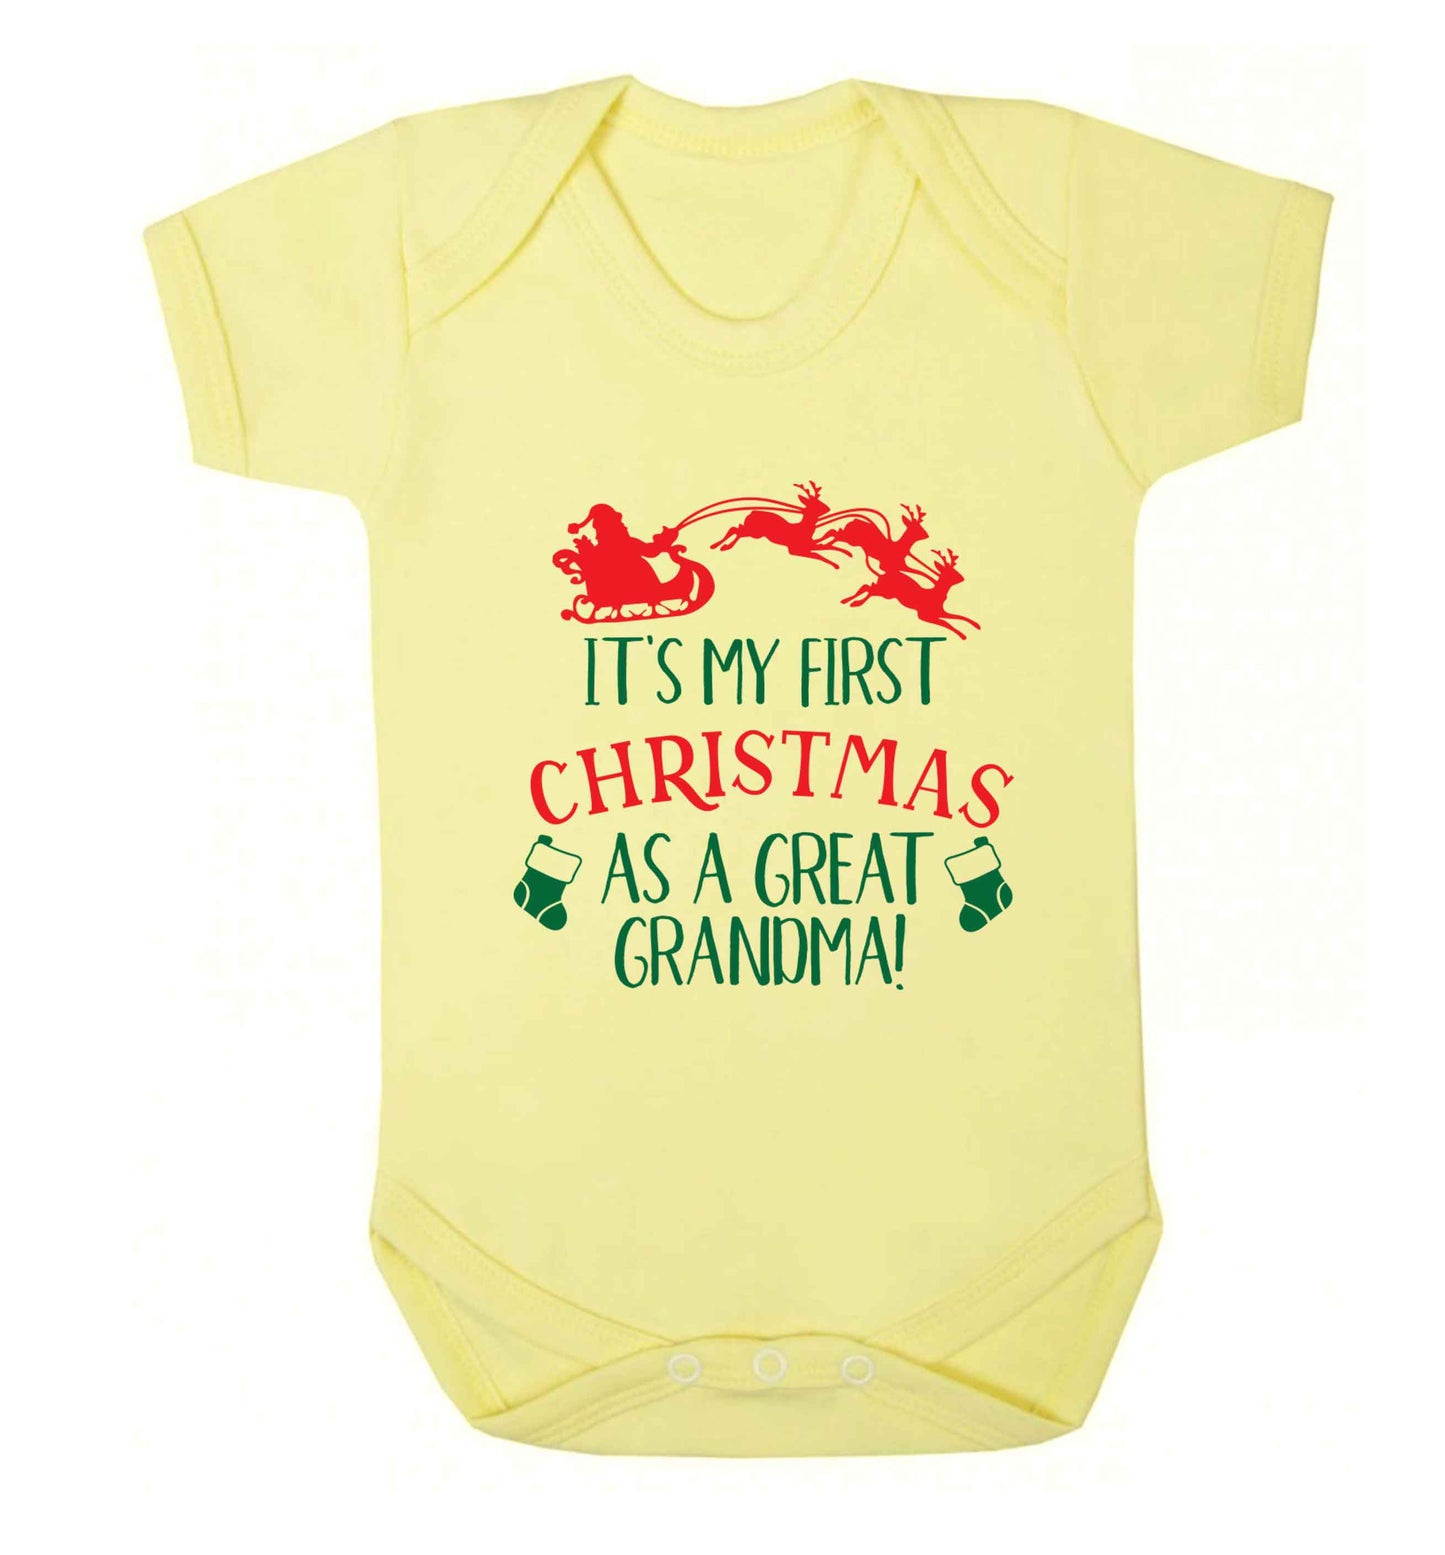 It's my first Christmas as a great grandma! Baby Vest pale yellow 18-24 months